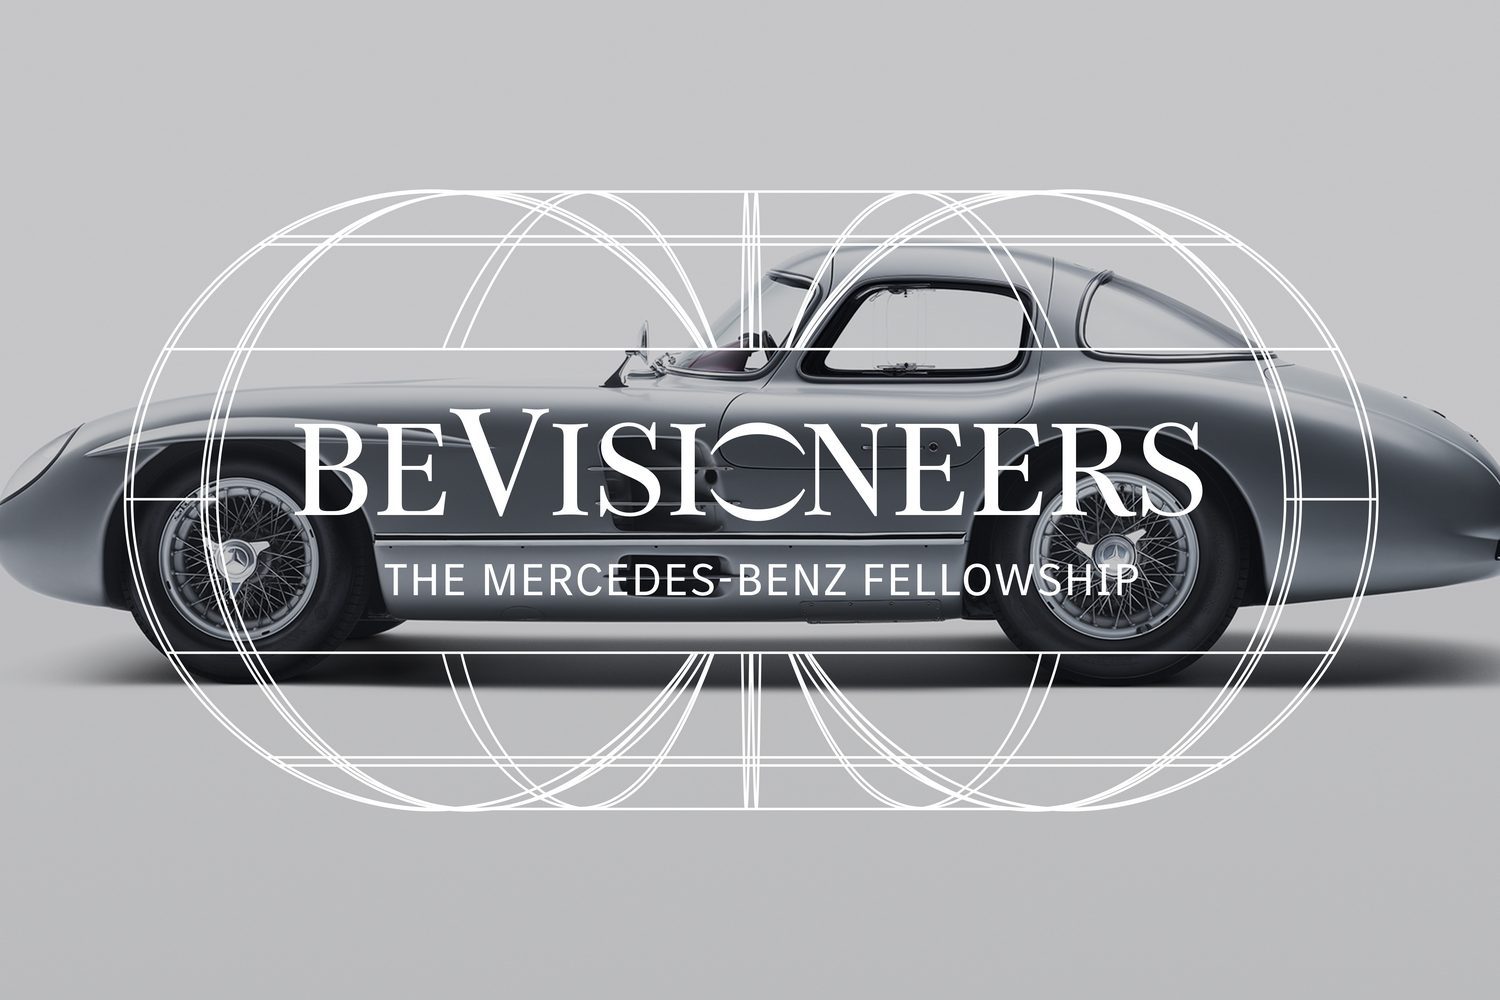 Mercedes starts beVisioneers charity